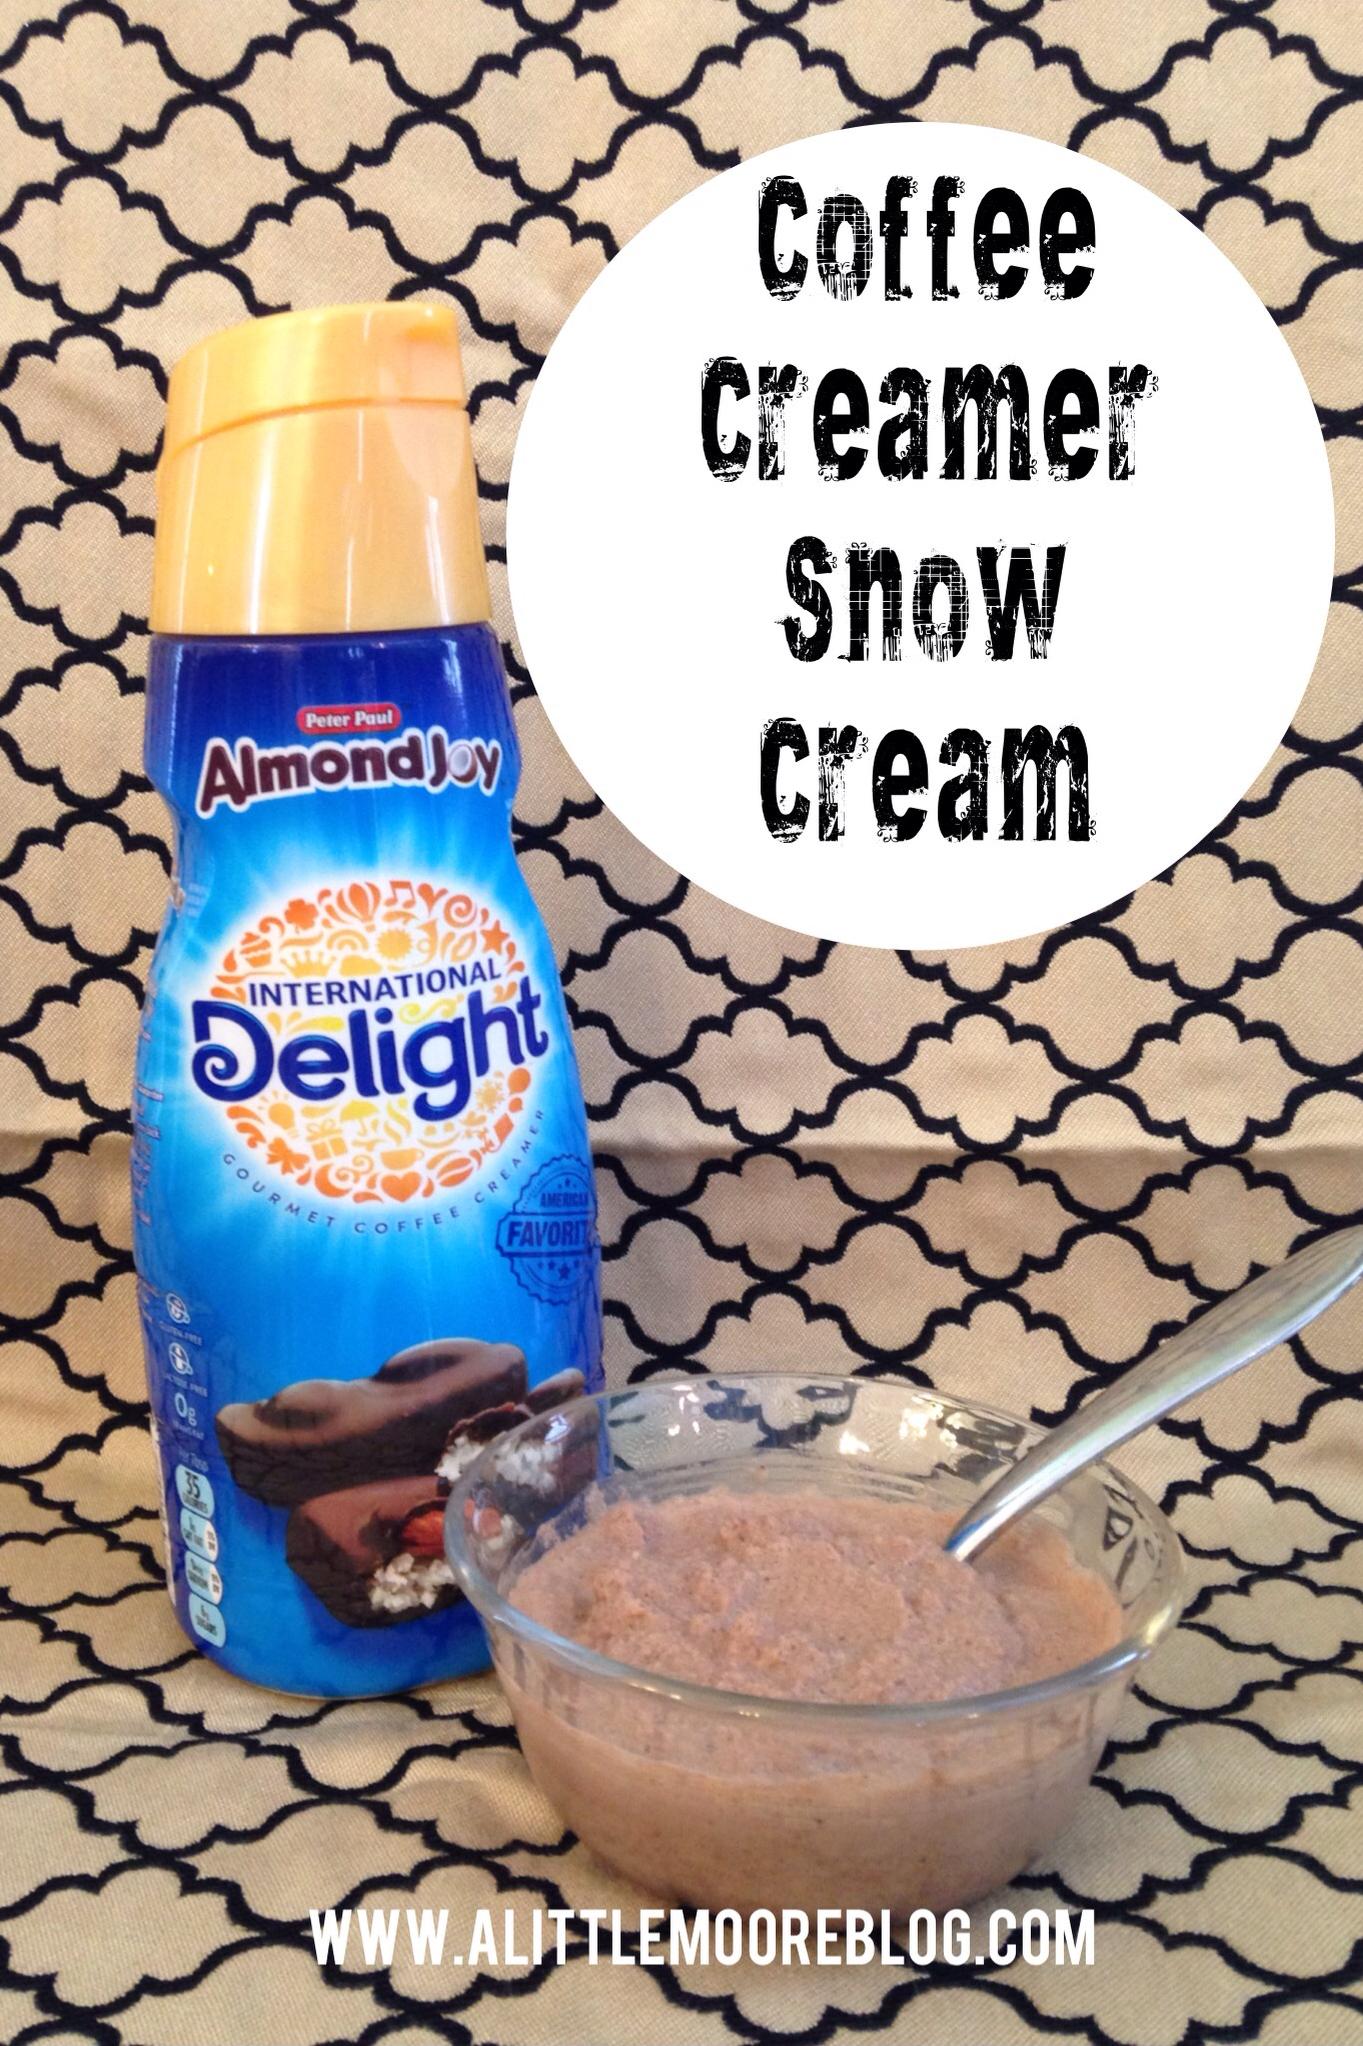  You don't need to leave your house to enjoy the snow, whip up this snow cream instead!